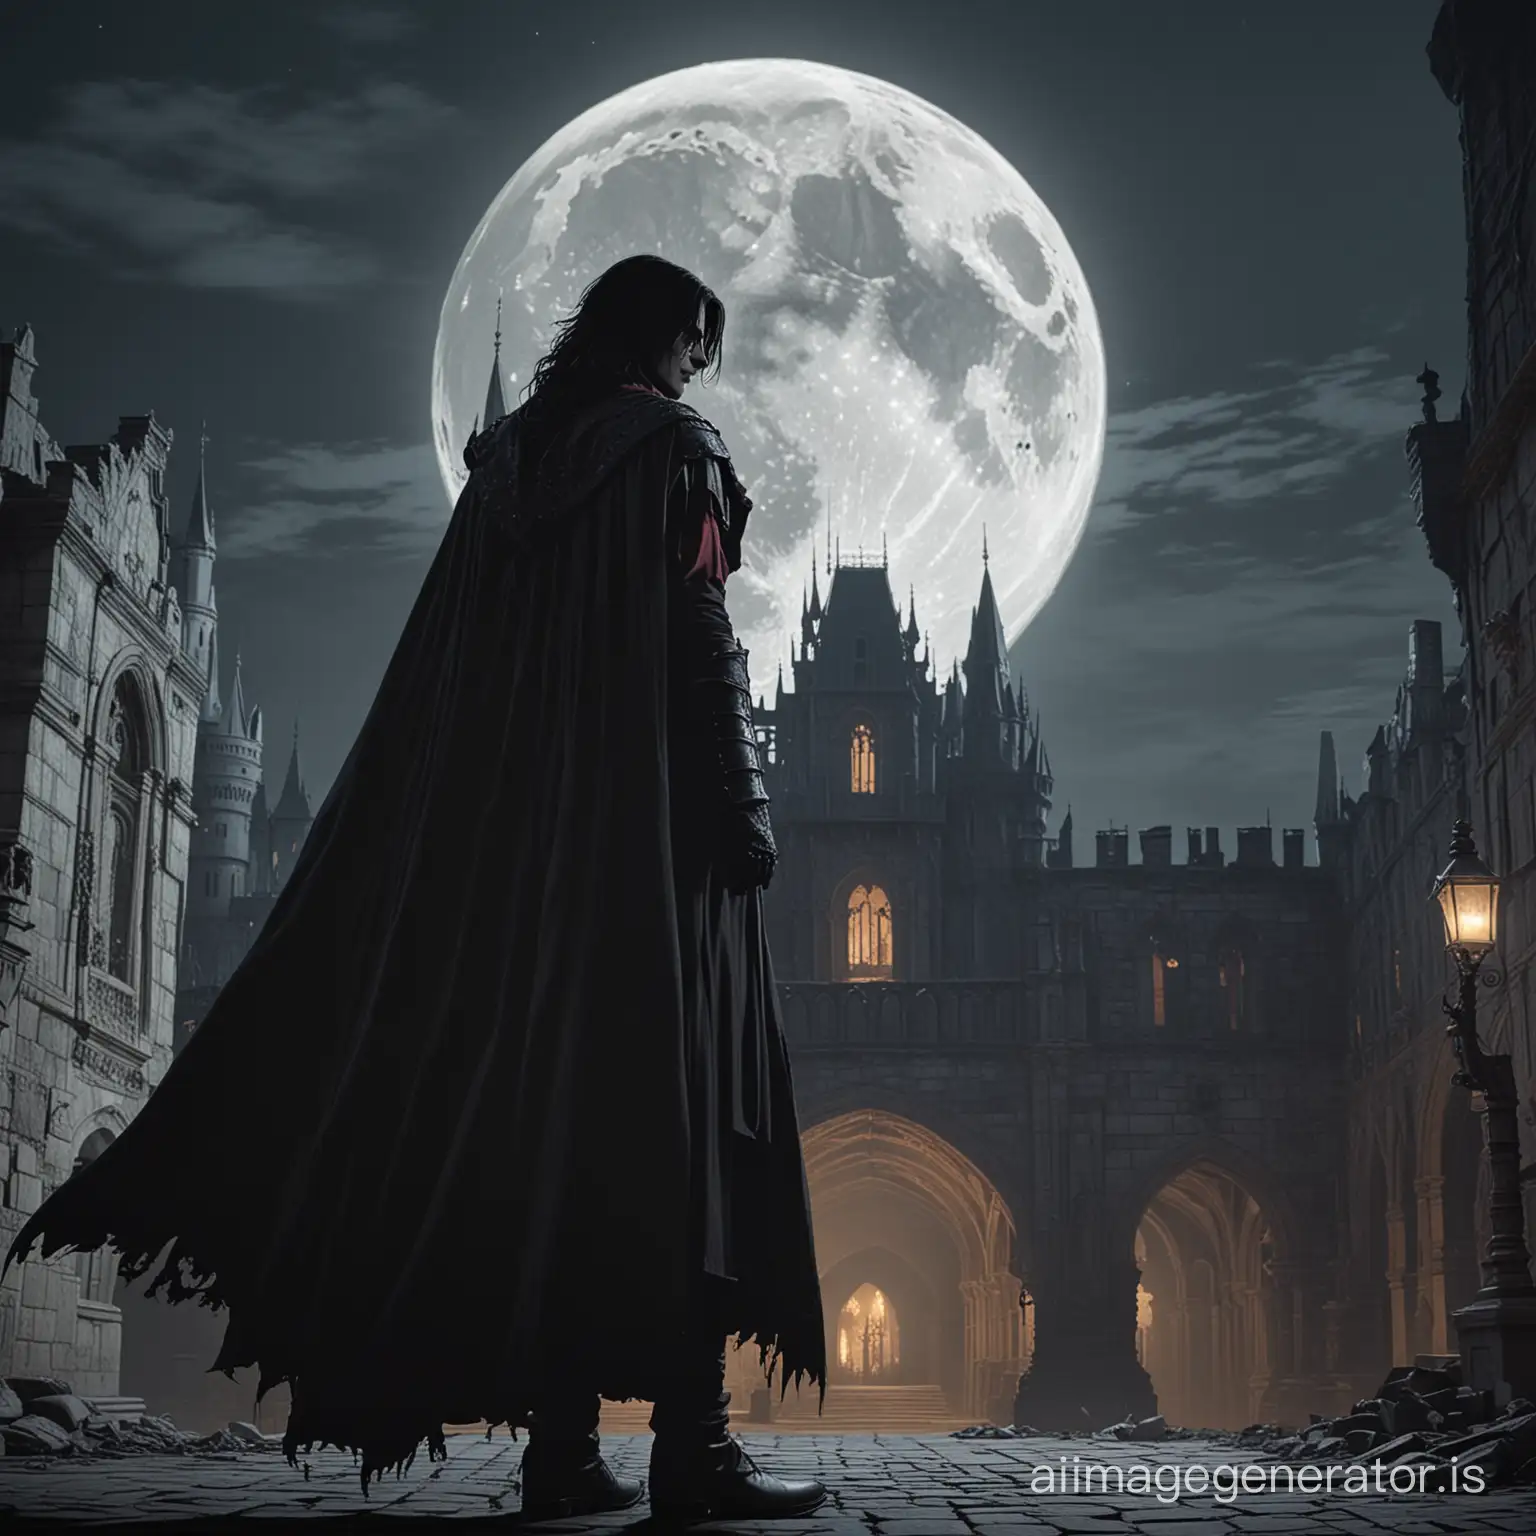 Alucard in frayed cloak standing in a castle courtyard, the castle is in ruins. The moon is visible above the castle